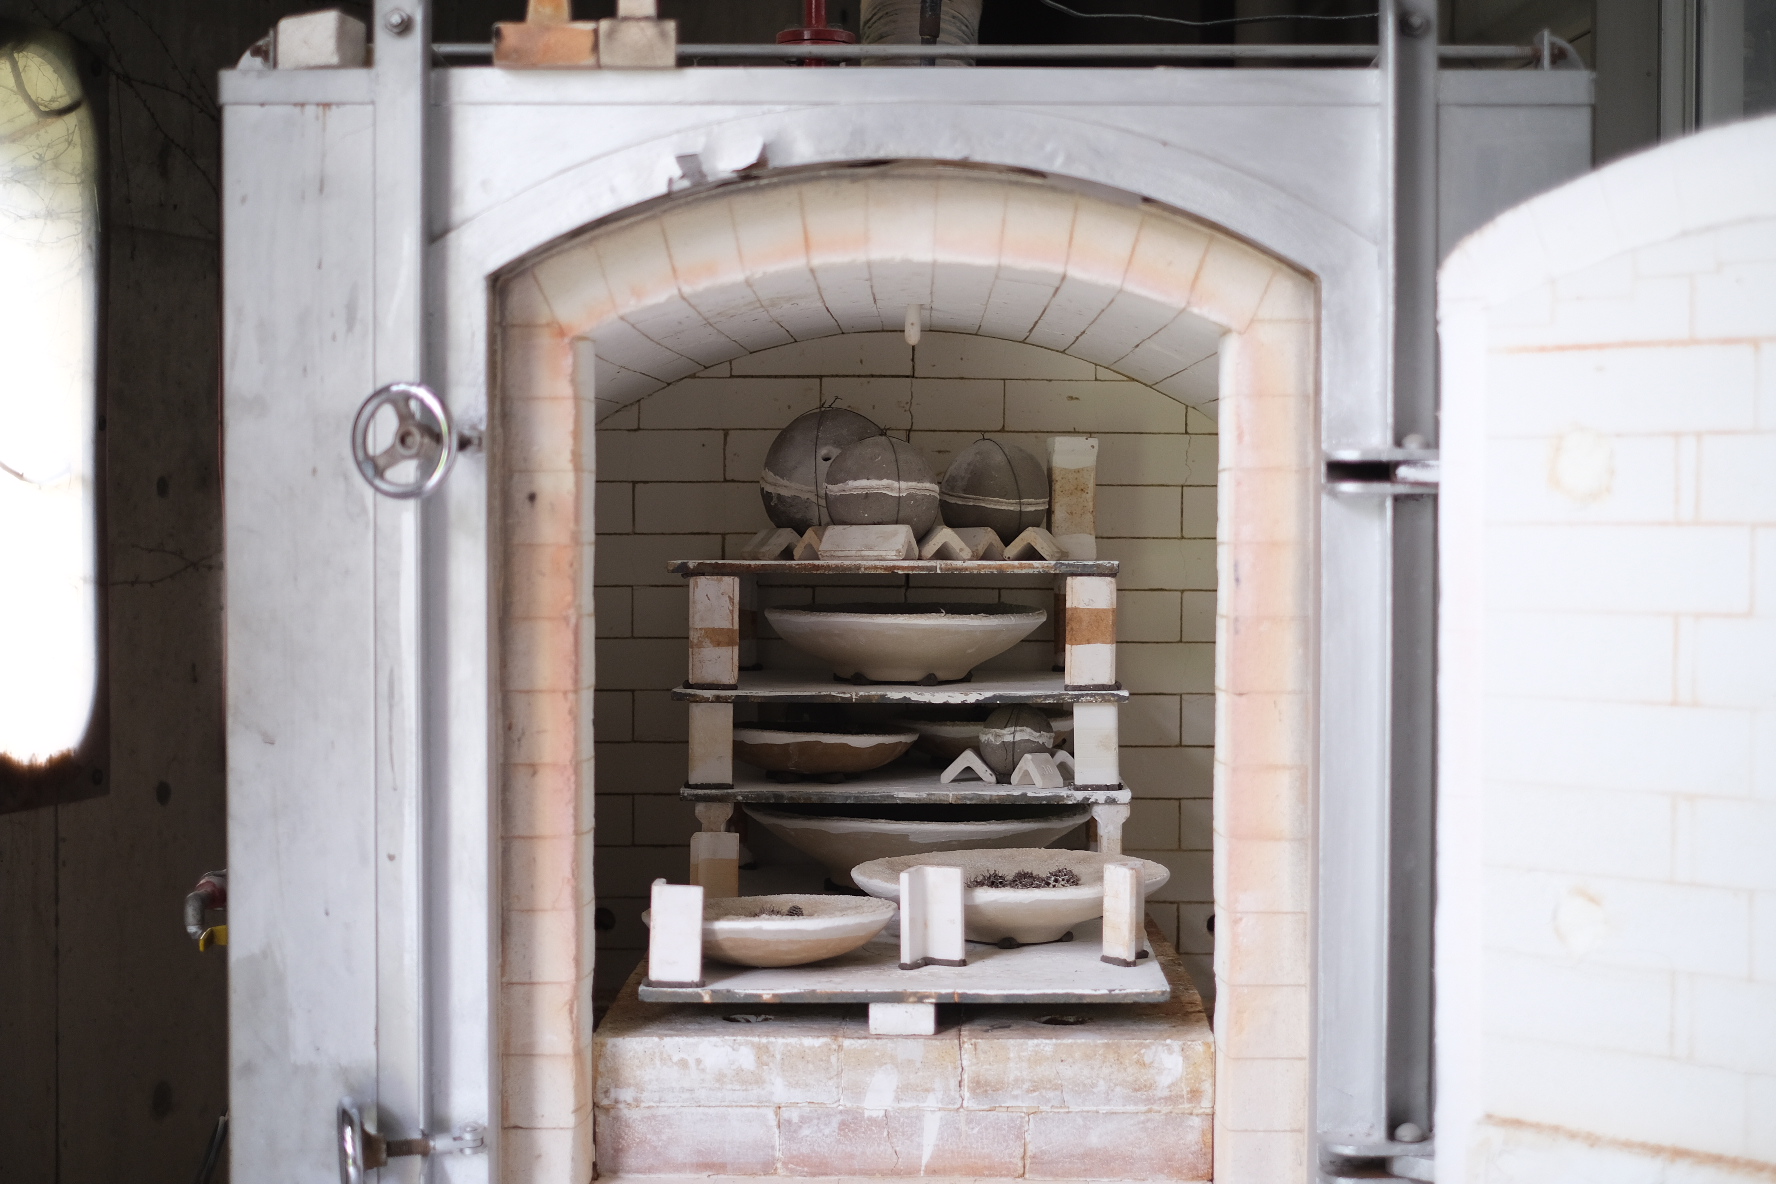 My ceramic works before being fired, arranged with the front-to-back method in the 0.4 cubic meter gas kiln.